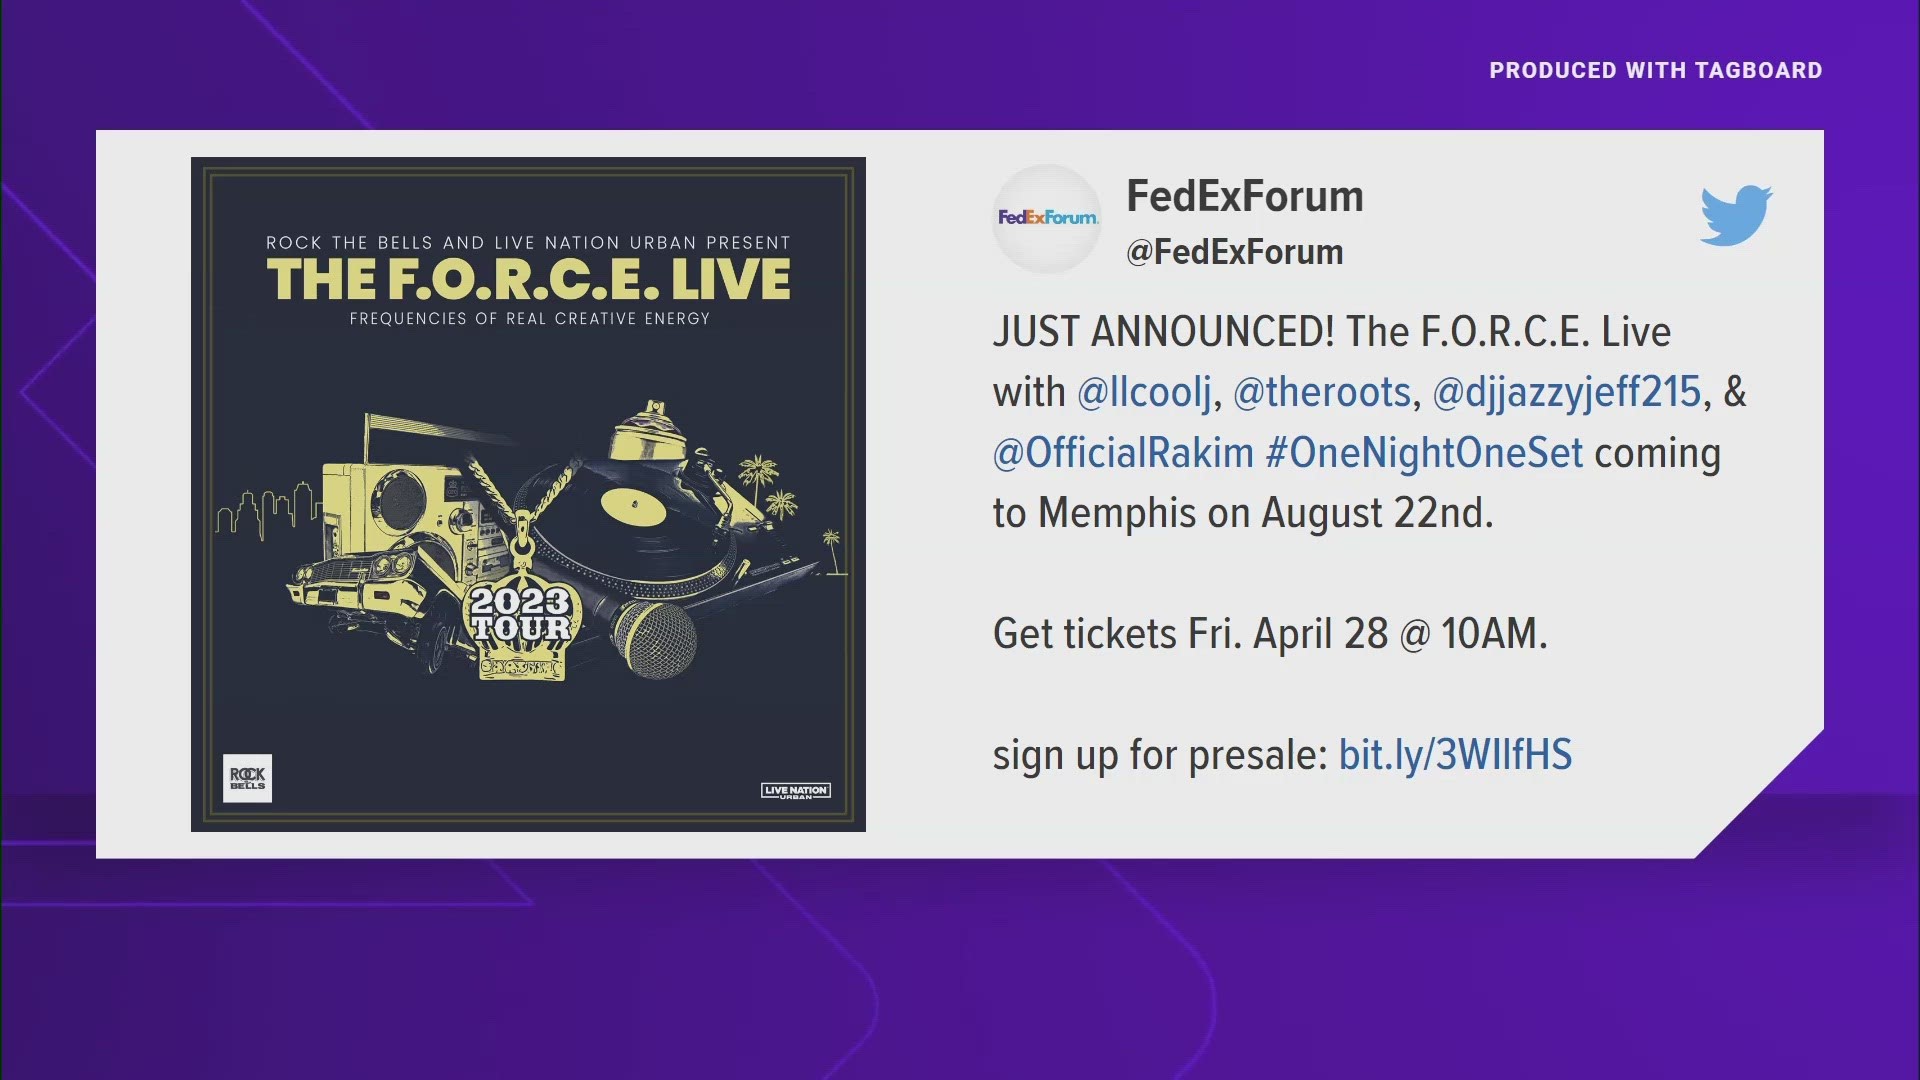 Hip-hop legend LL Cool J will hit the stage at FedExForum in August for The F.O.R.C.E. (Frequencies of Real Creative Energy) Live tour.